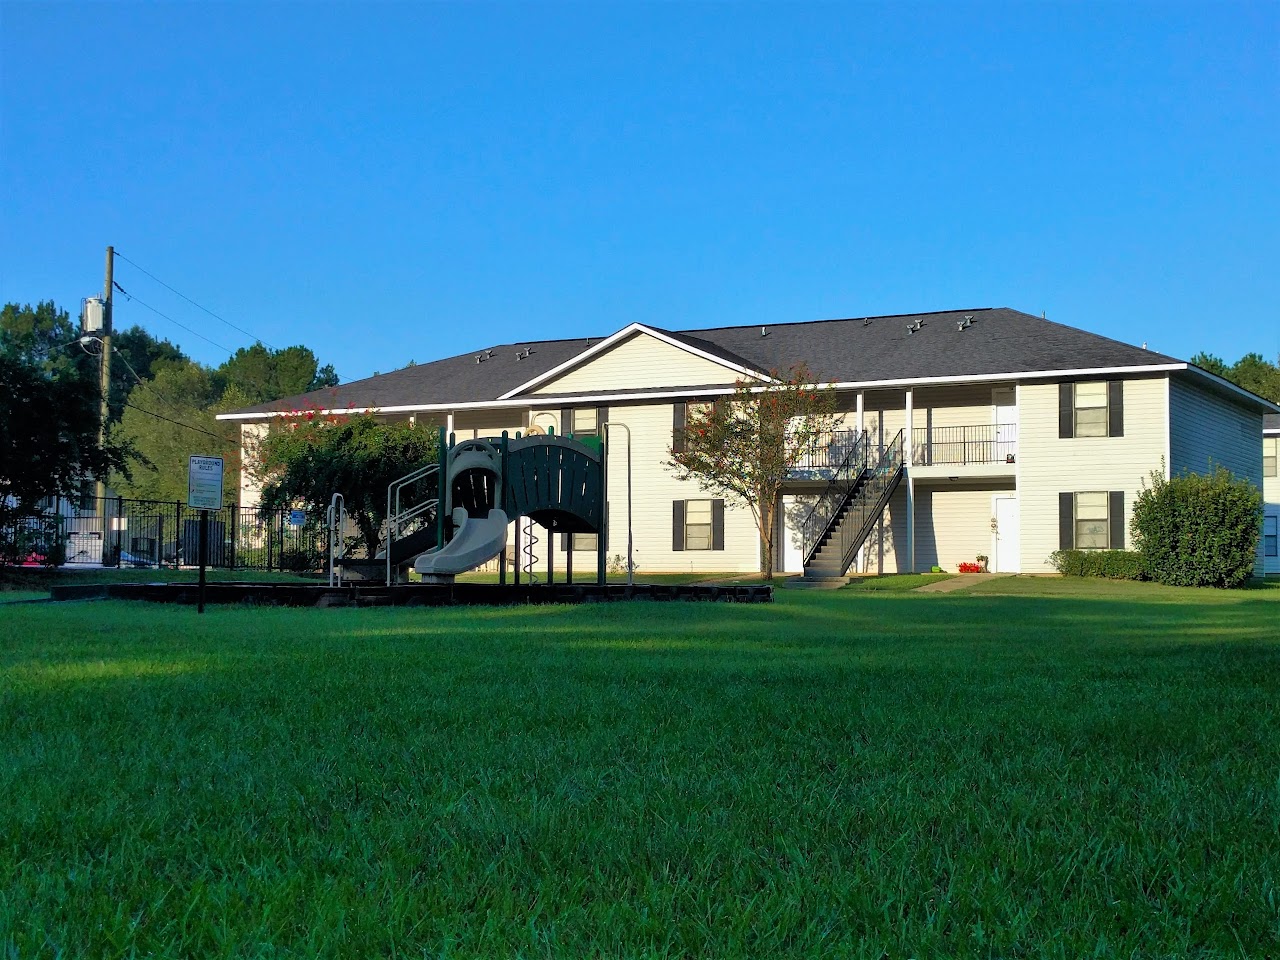 Photo of VILLAGE GREEN. Affordable housing located at 2530 W. BARNNETT SPRINGS RUSTON, LA 71270